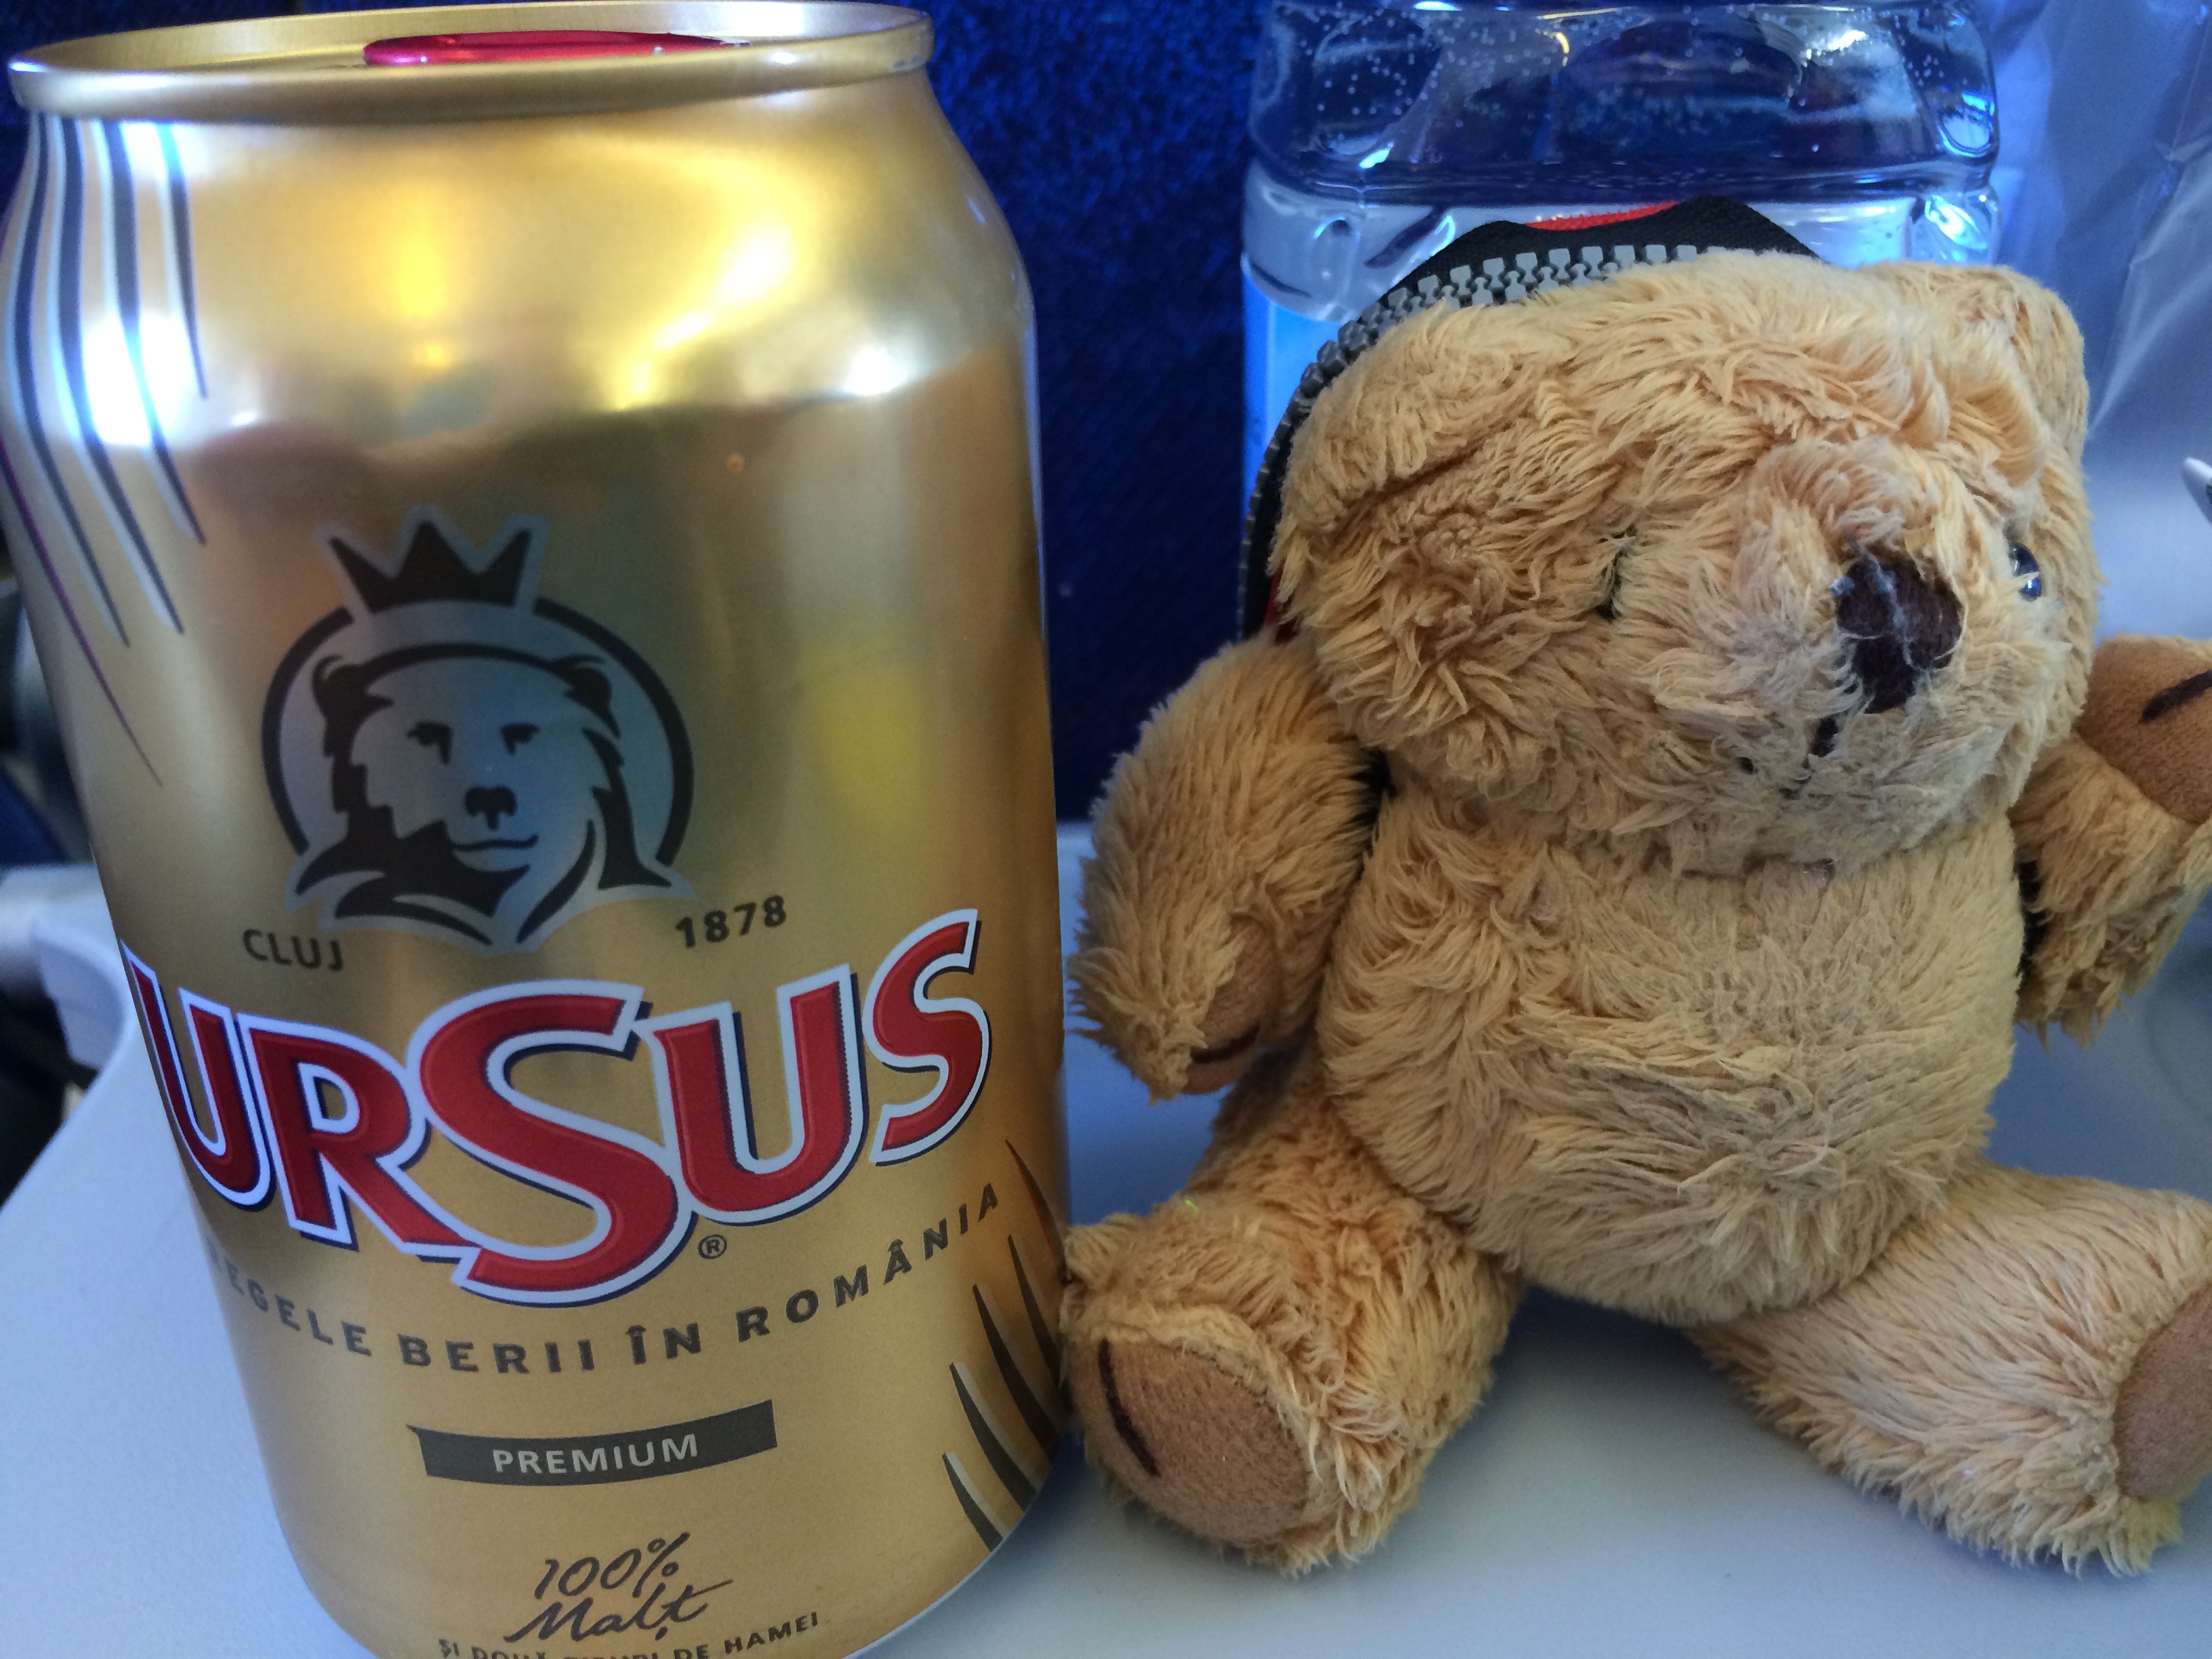 Little Ted and the Hungarian bear beer